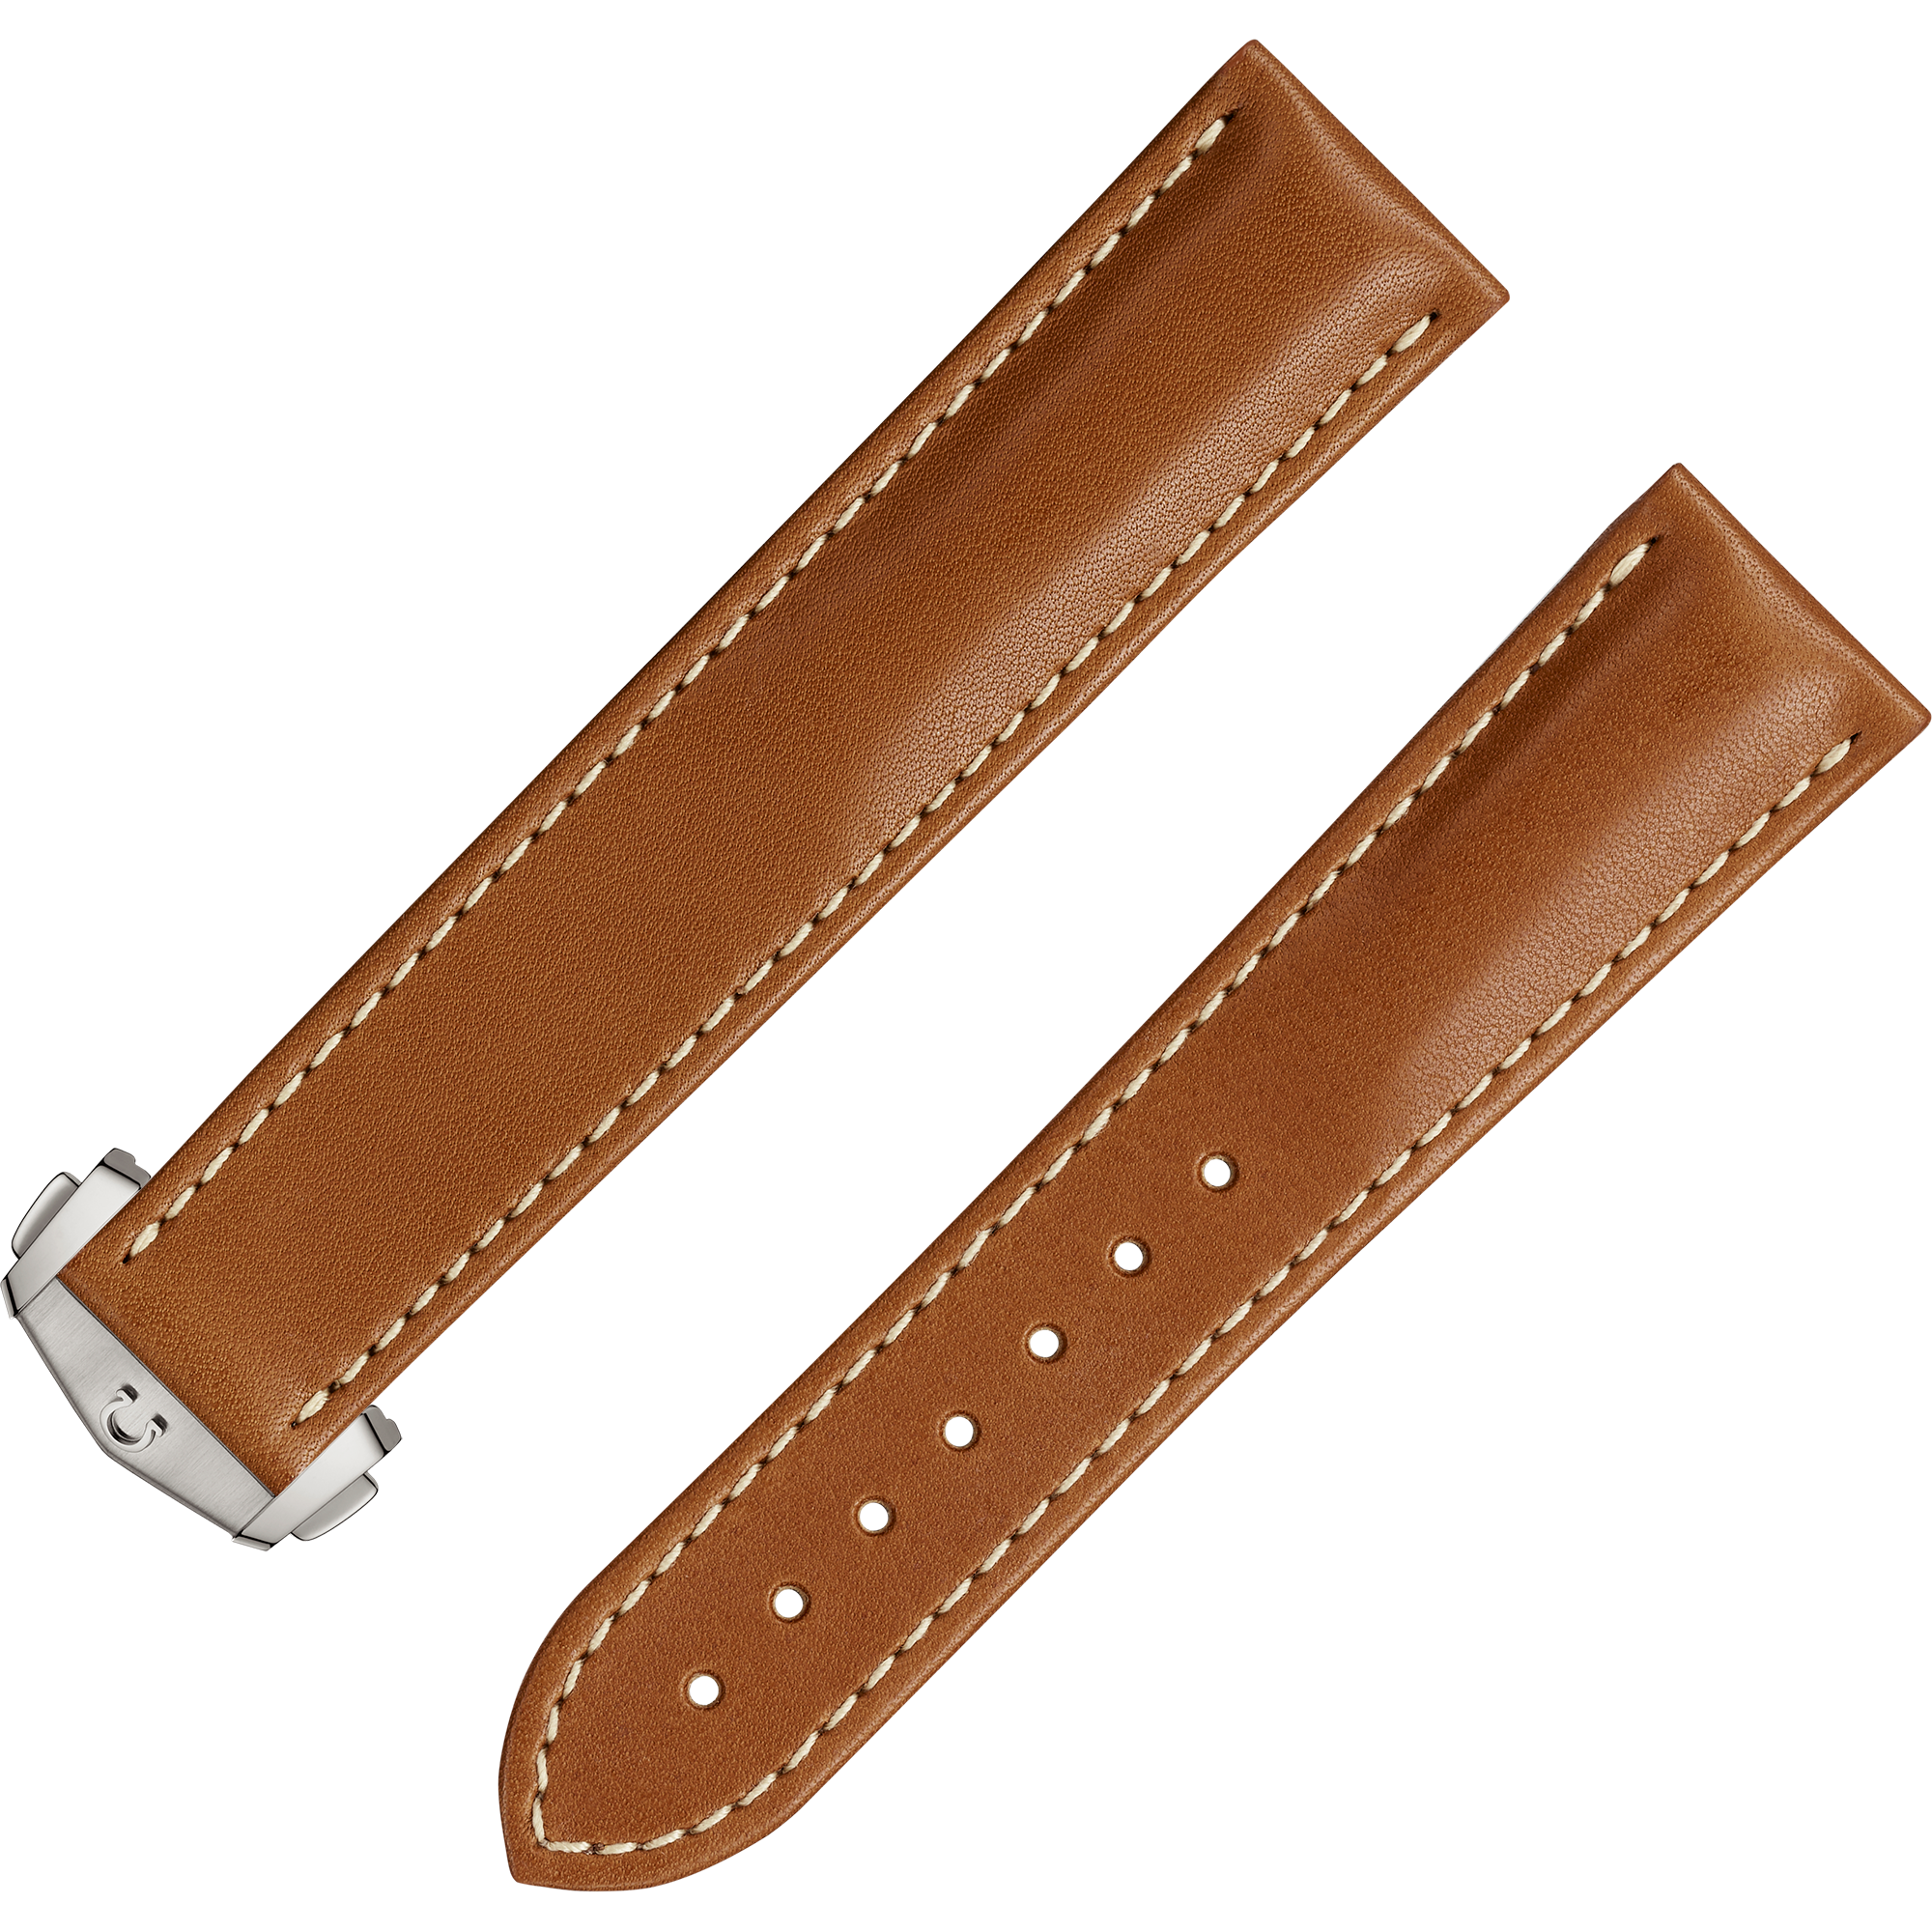 Two-piece strap - Golden brown leather strap with foldover clasp - 032CUZ007420W